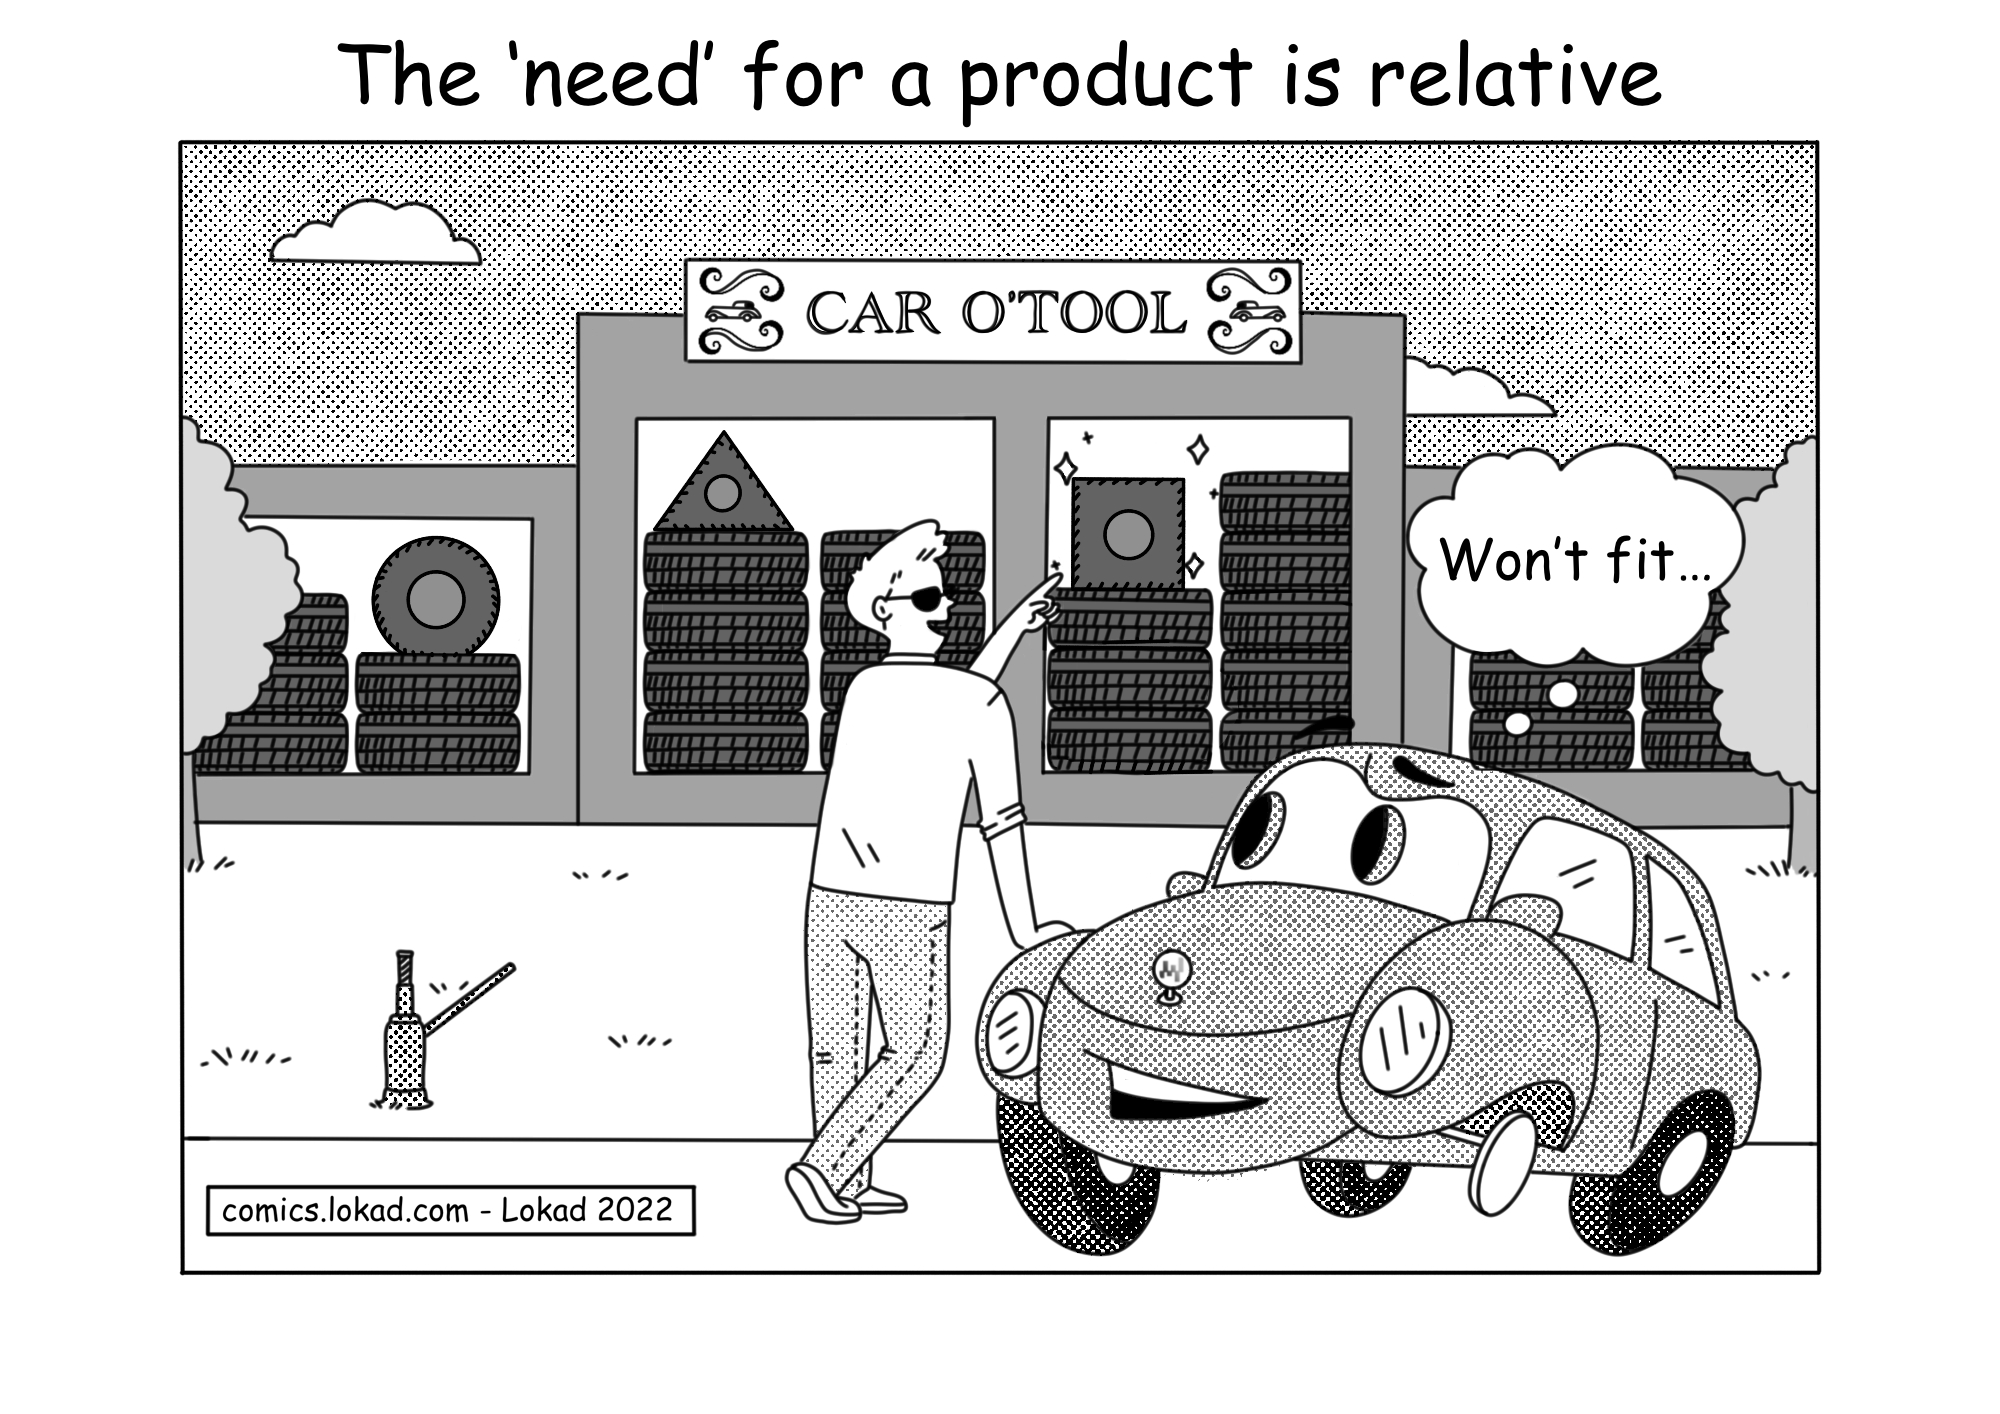 The ‘need’ for a product is relative.